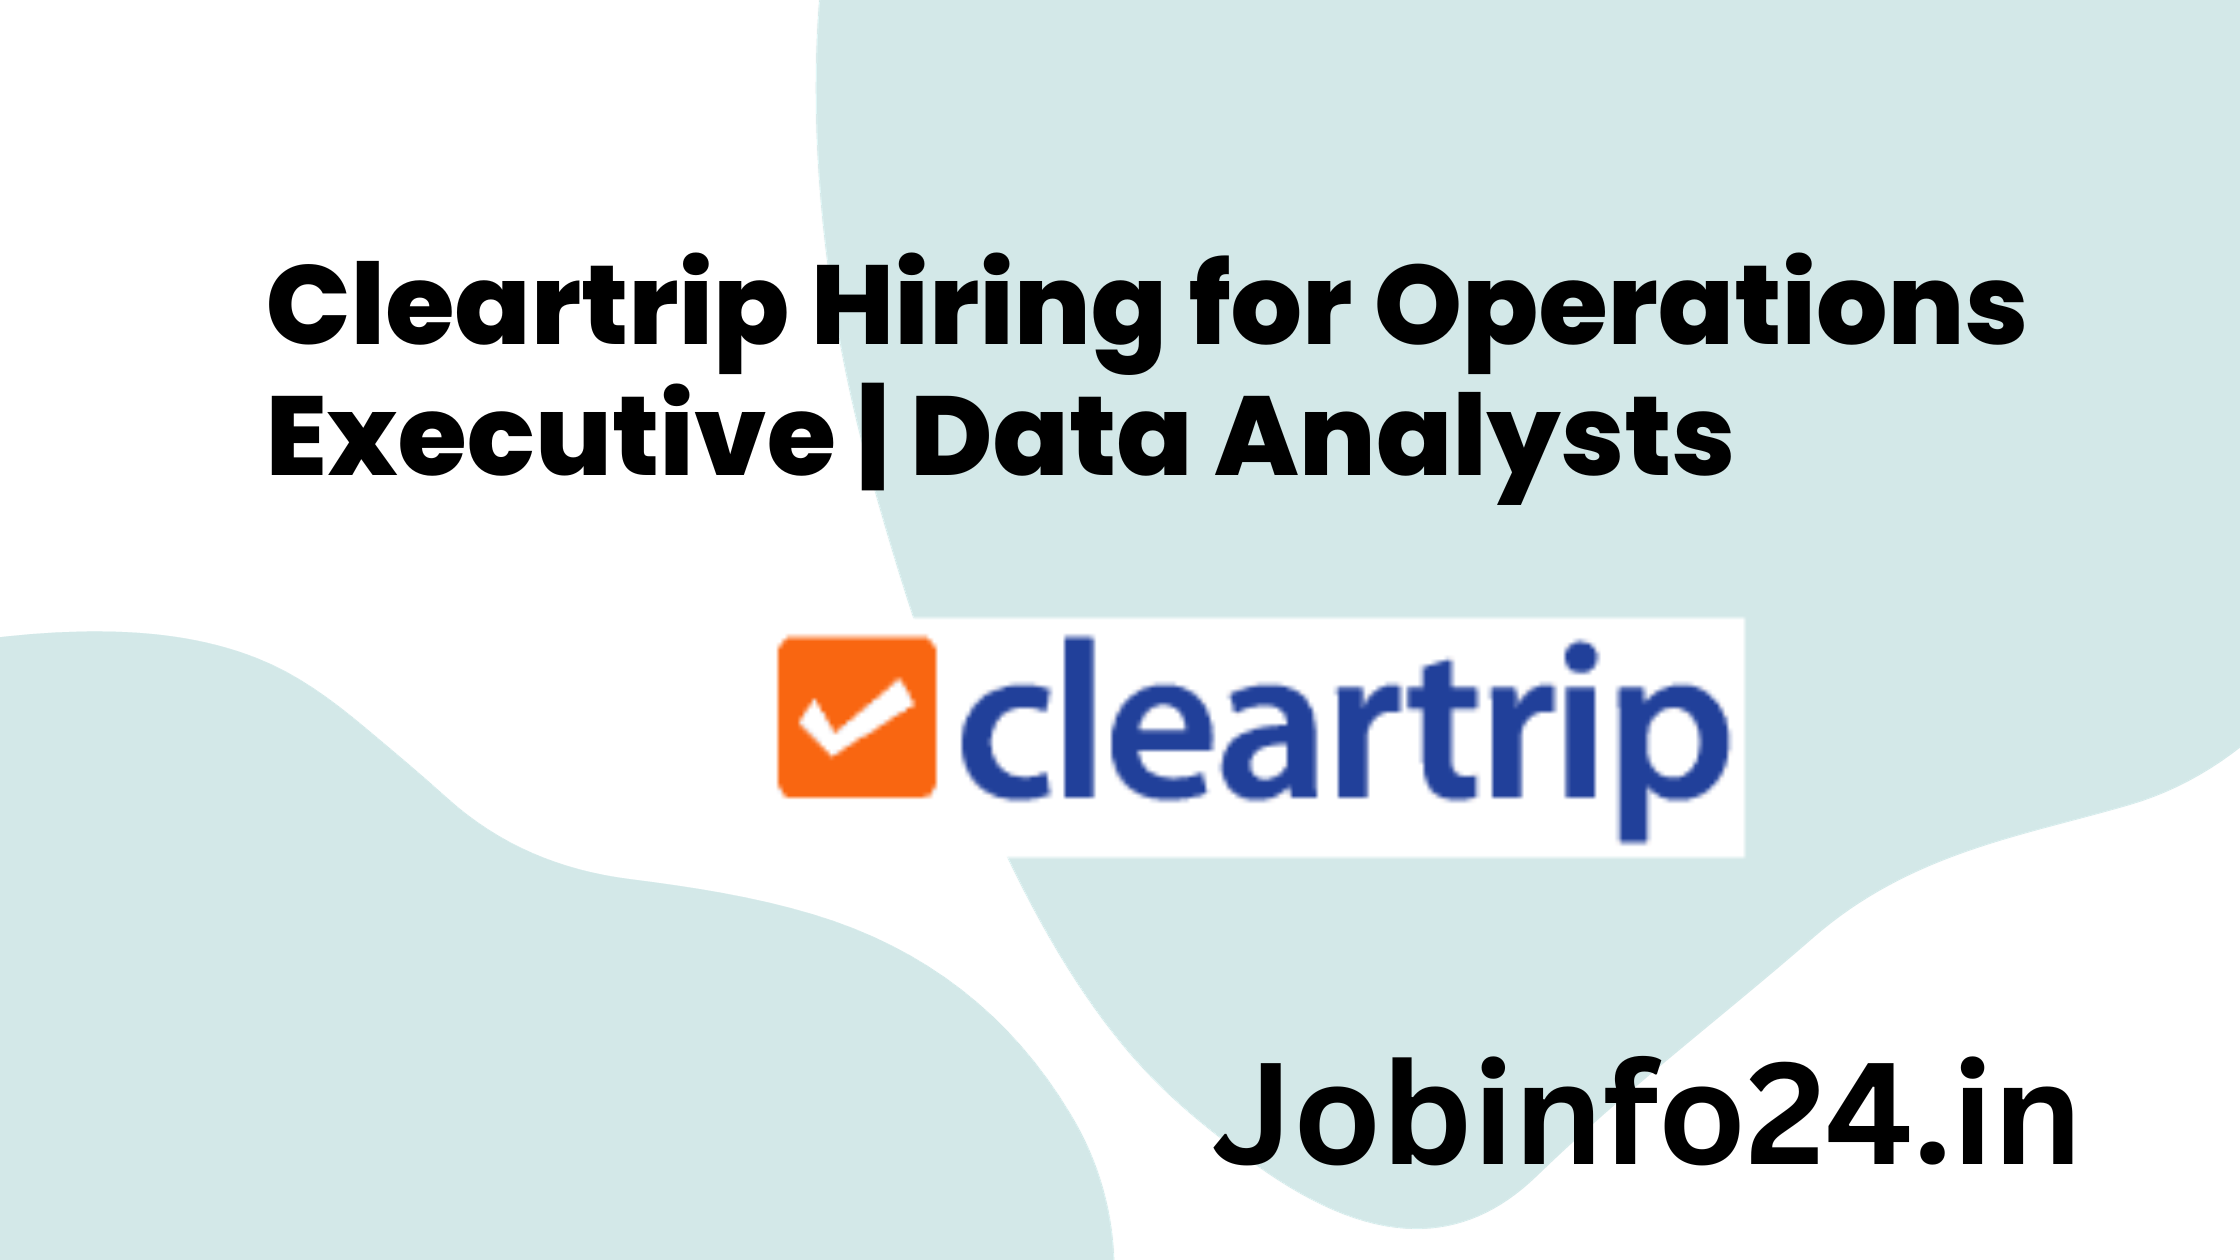 Cleartrip Hiring for Operations Executive | Data Analysts